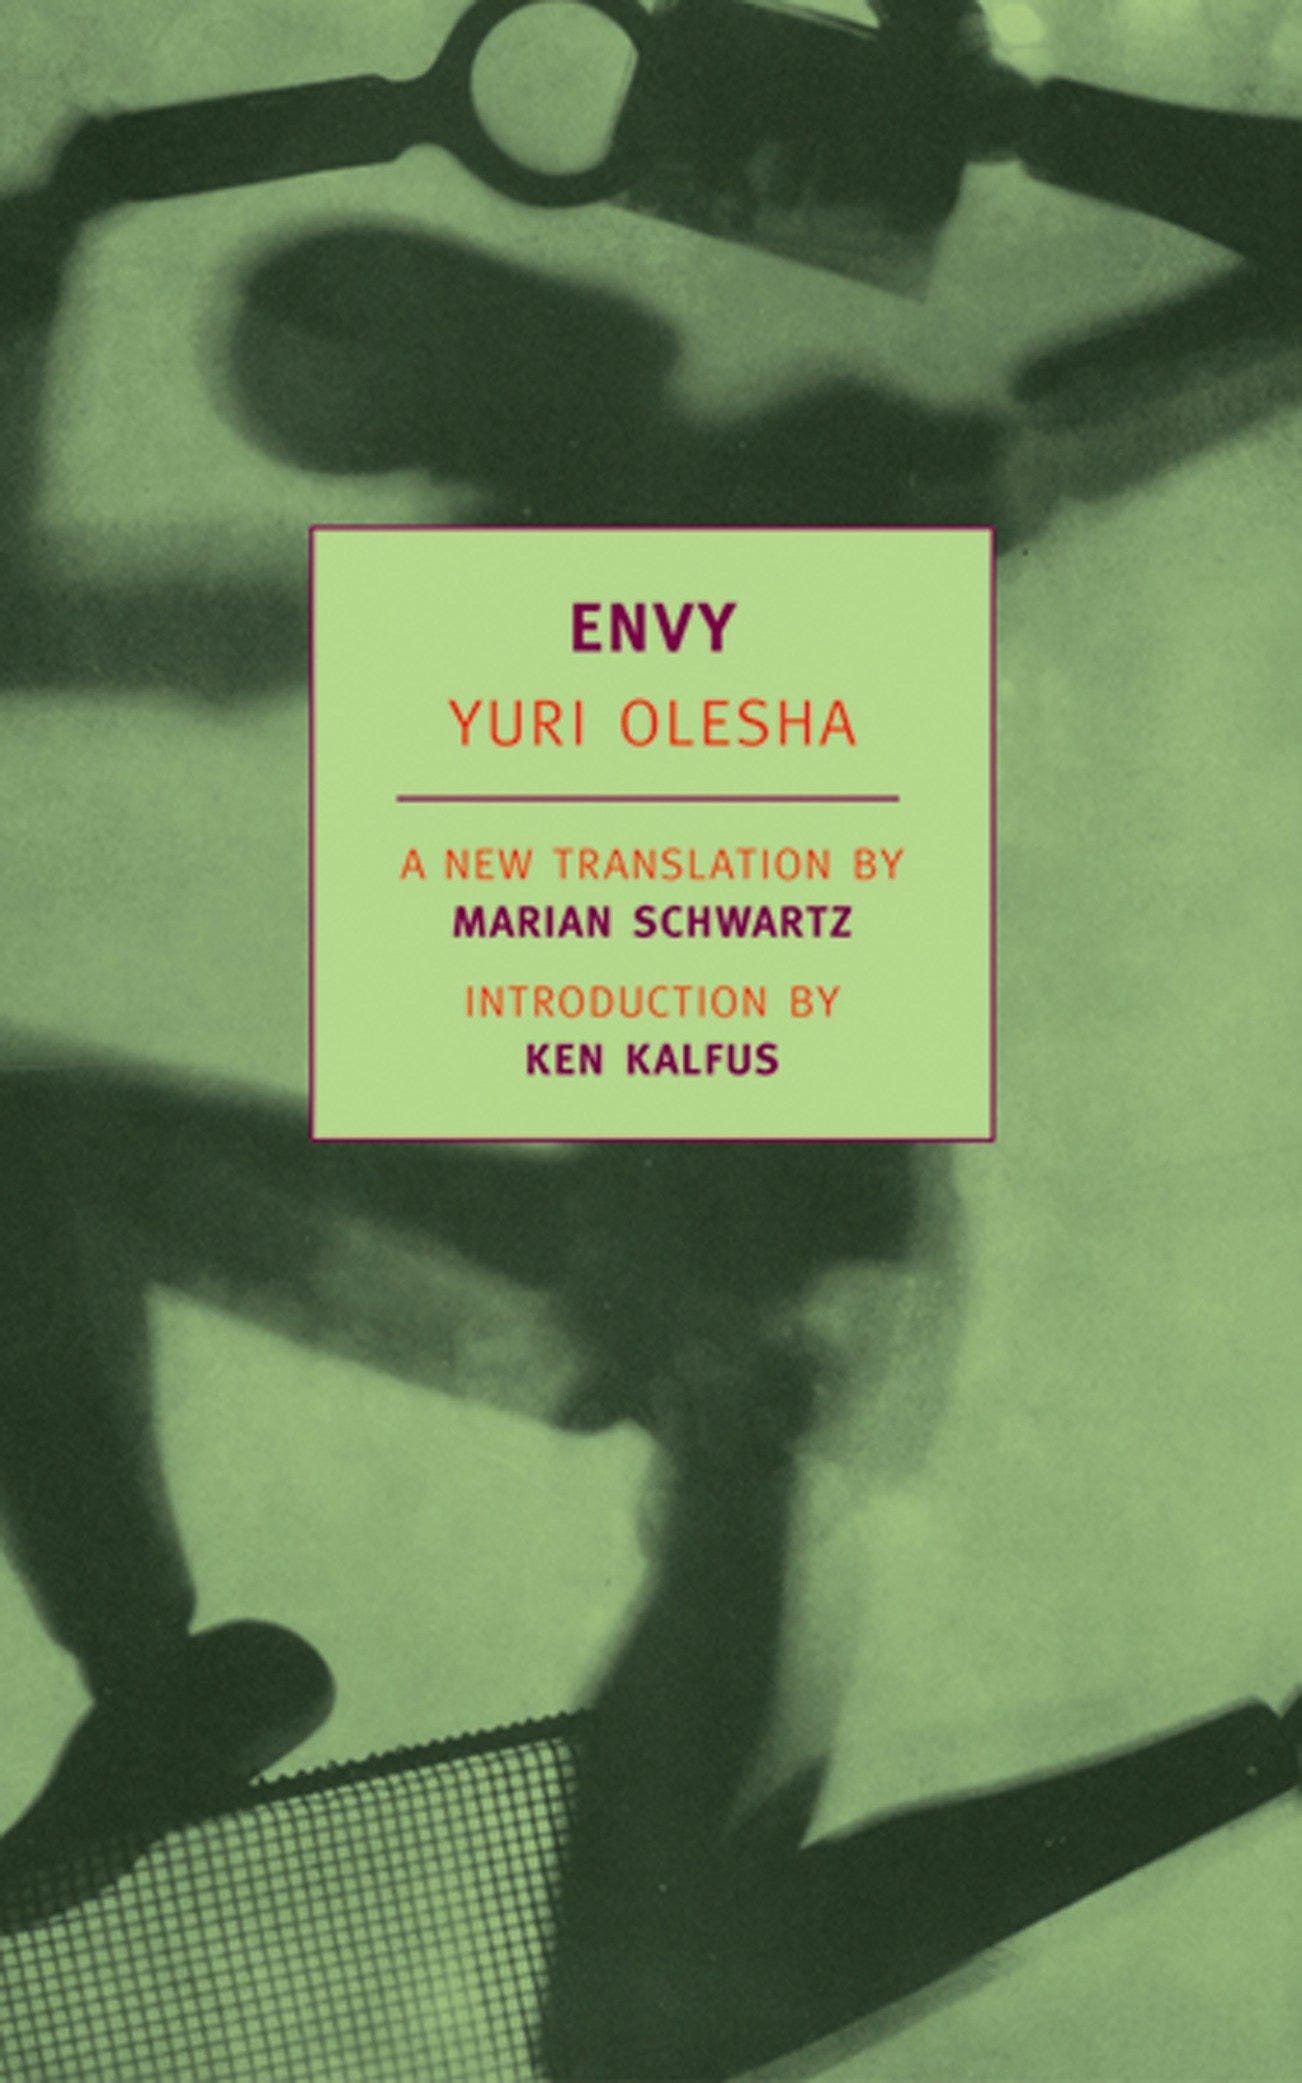 Envy's cover page (all dark green). It reads: "ENVY by Yuri Olesha | A new translation by Marian Schwartz | Introduction by Ken Kalfus"